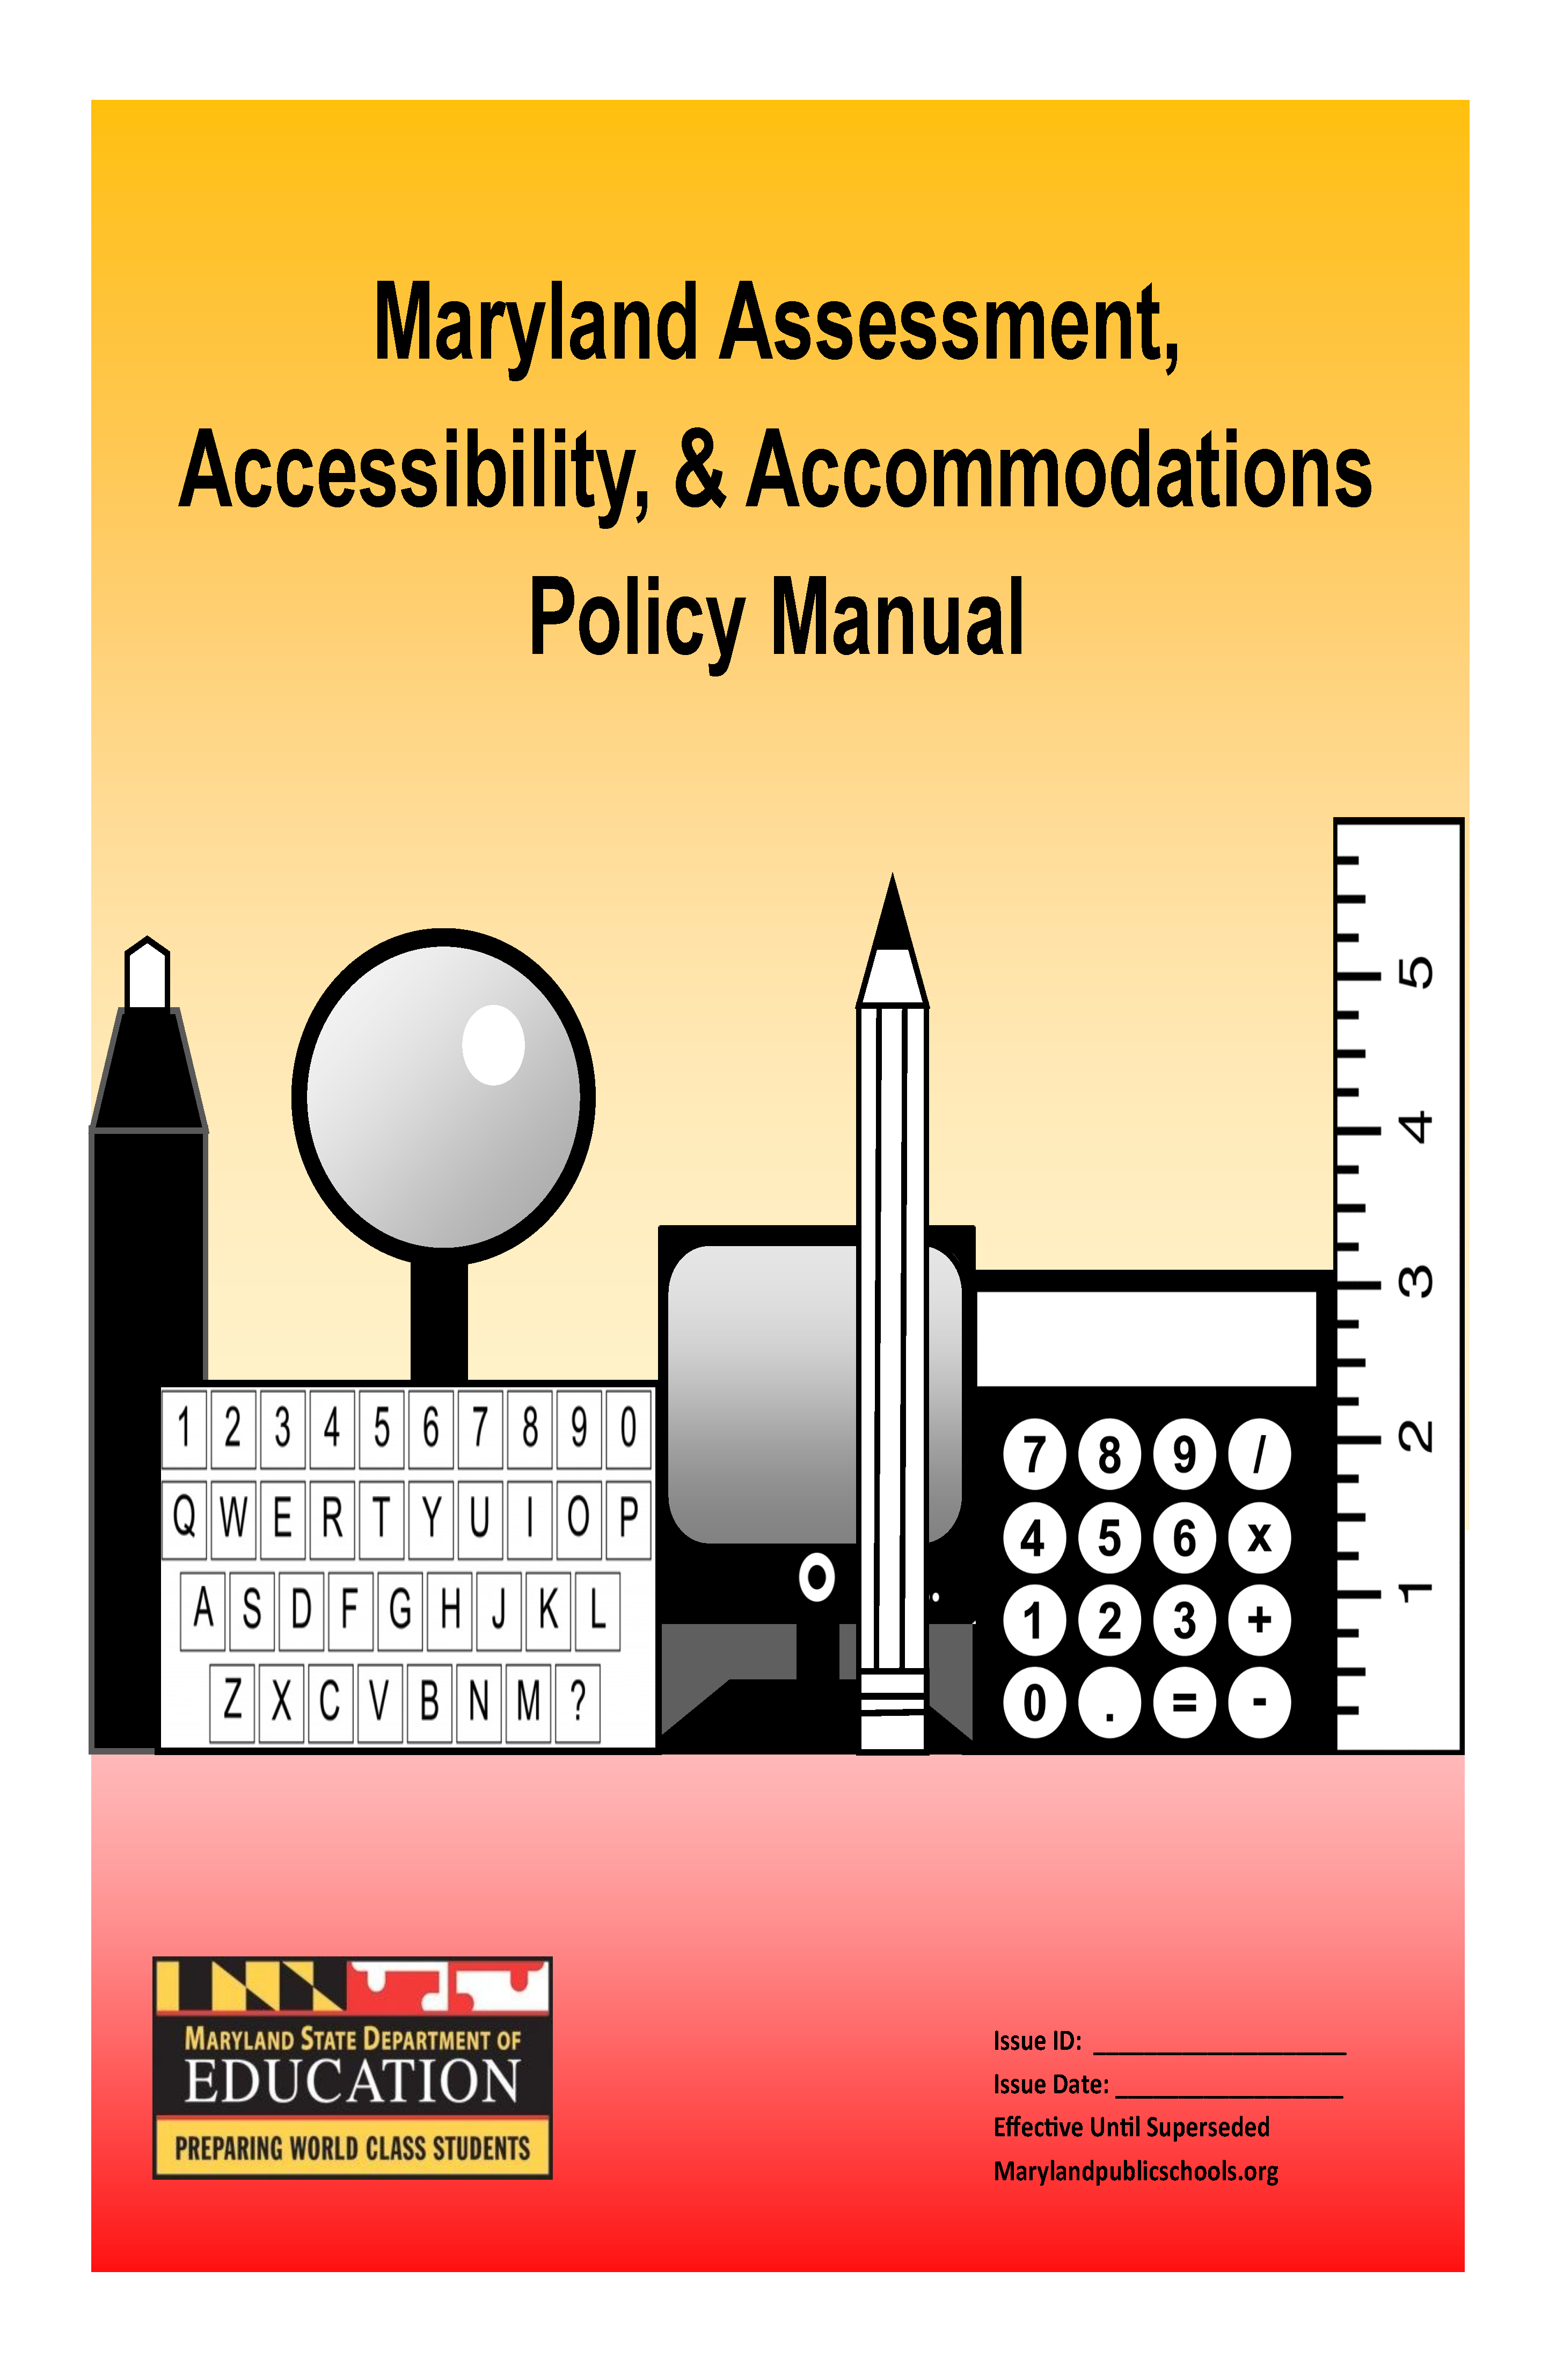 Maryland Assessment, Accessibility & Accommodations Manual